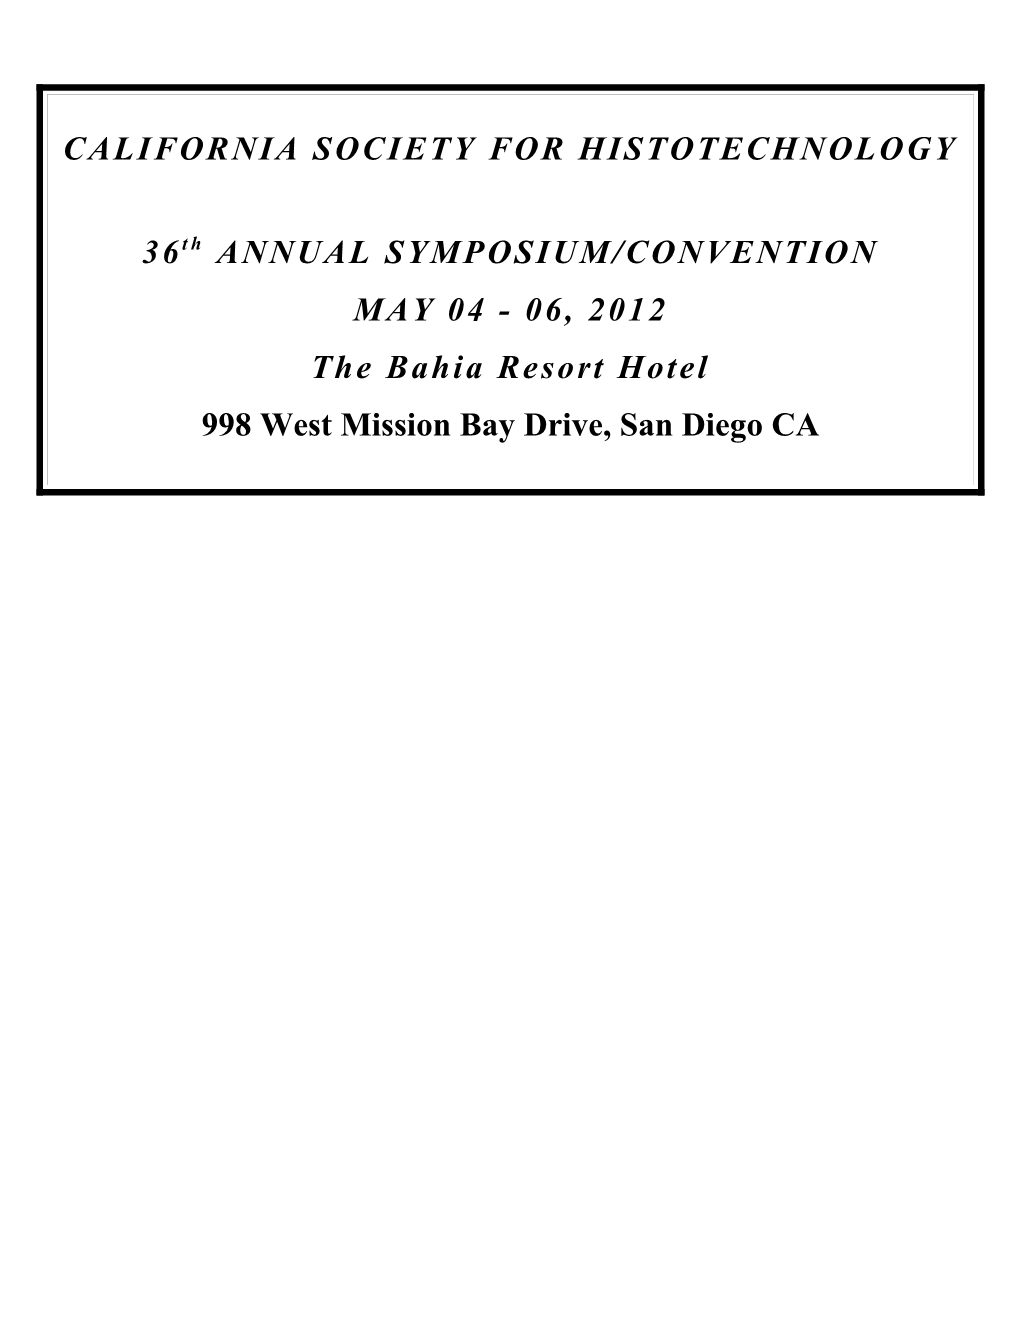 The Twenty-Fifty Annual Symposium Convention of the California Society for Histotechnology